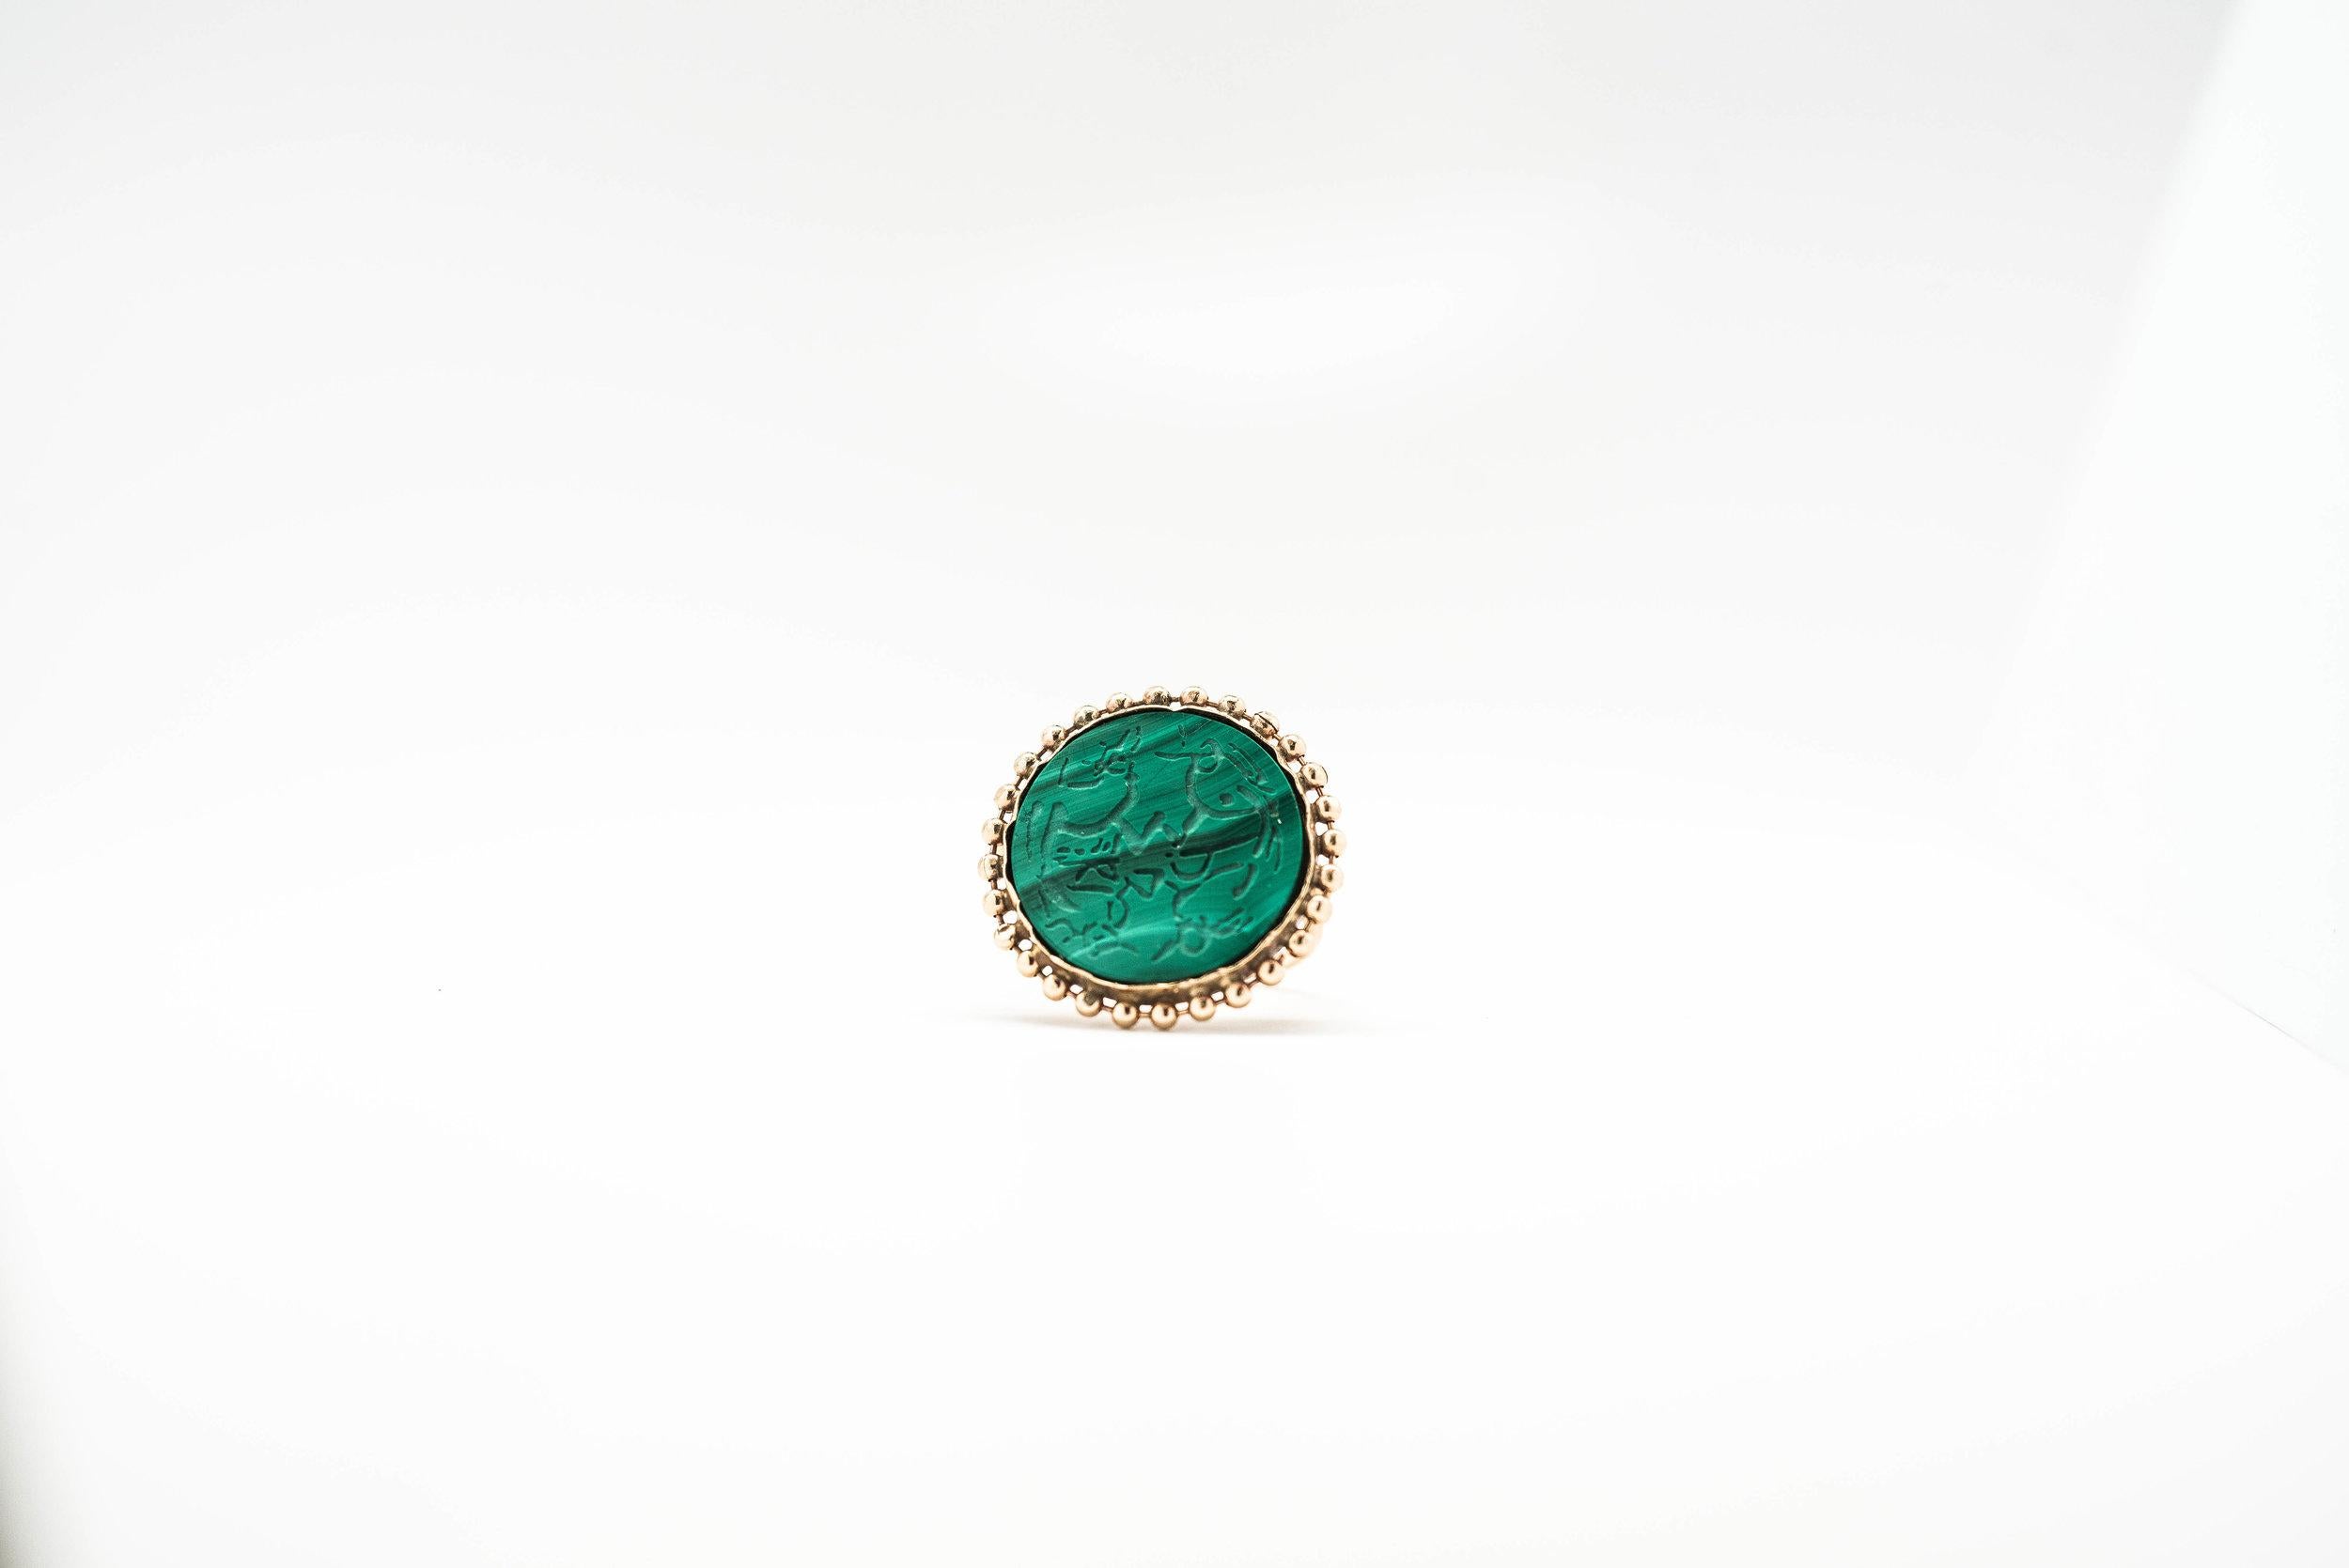 Contemporary Handcrafted Rising Phoenix Malachite 14 Karat Gold Signet Ring by L'Enchanteur For Sale